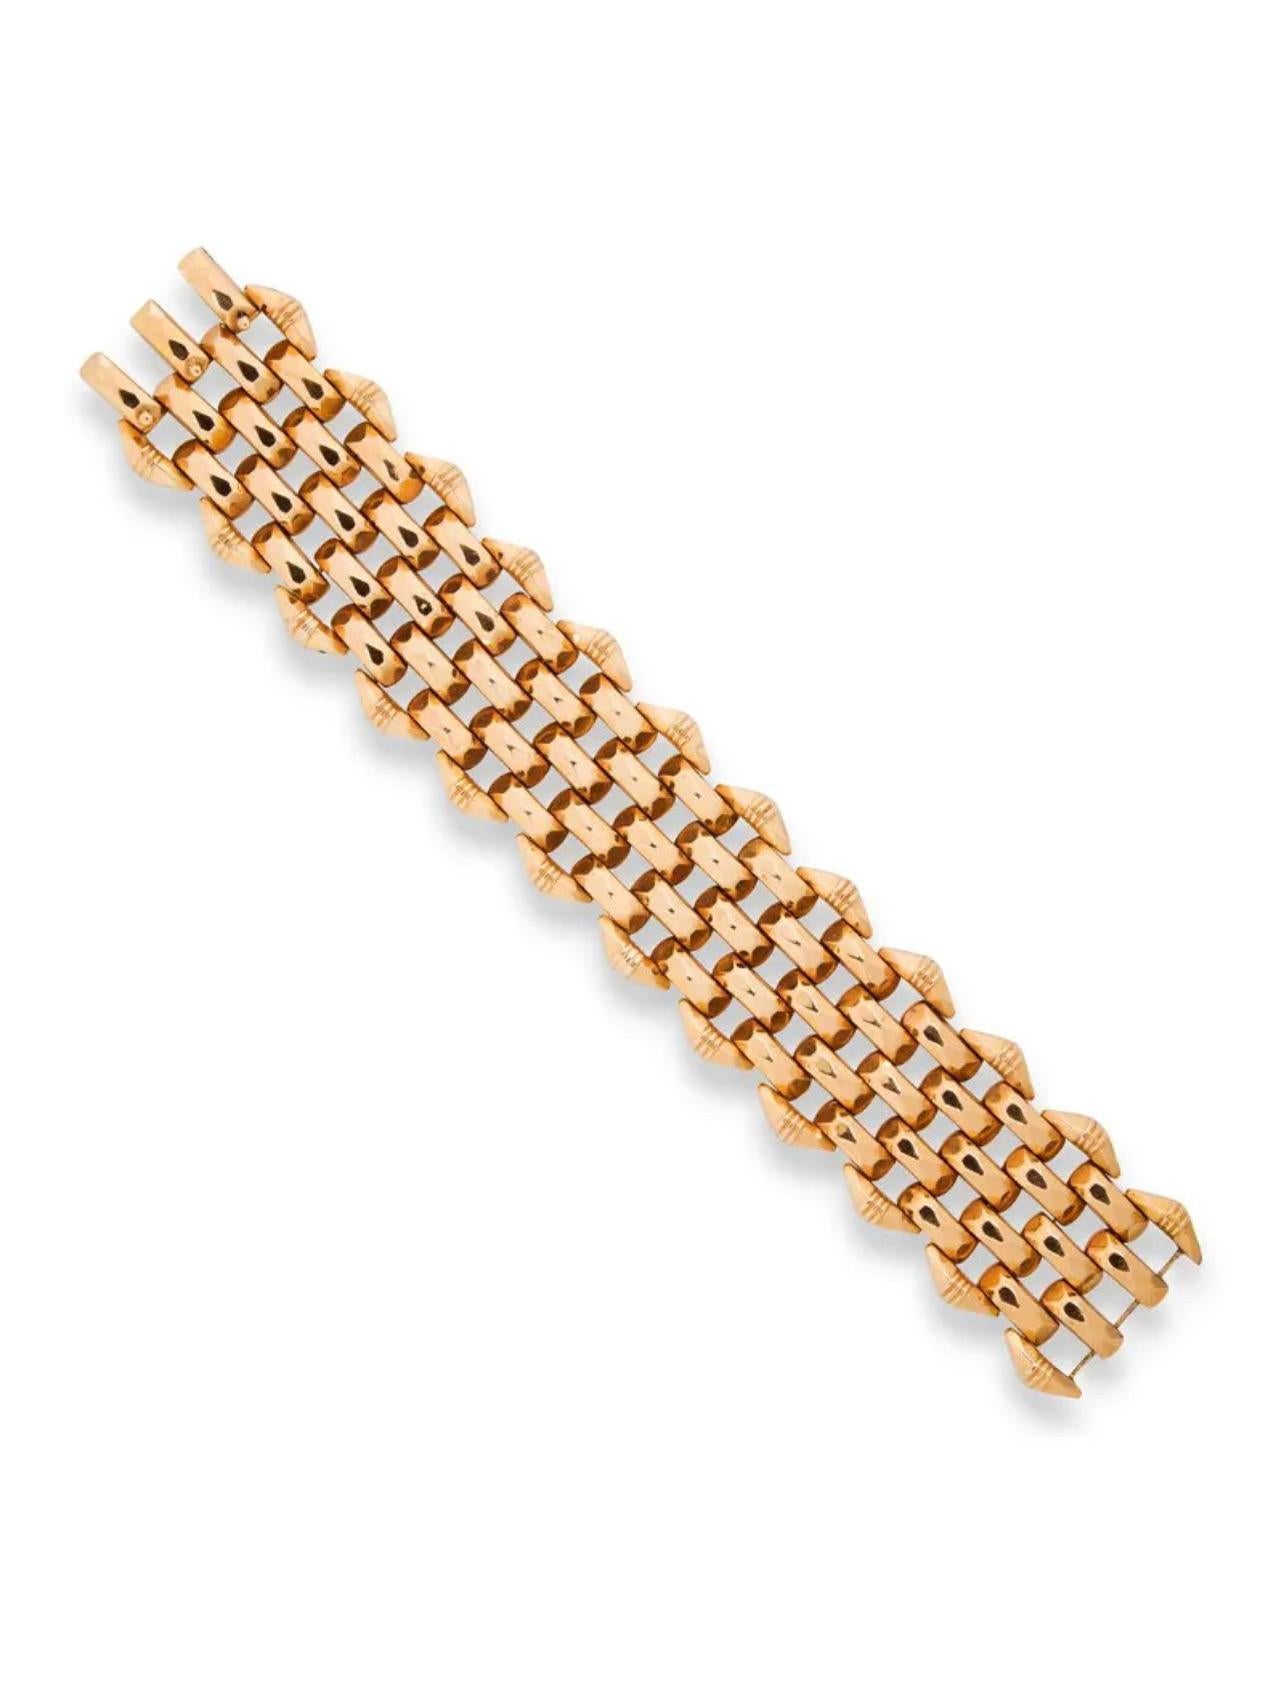 A chic and elegant Retro 18k yellow gold wide tank style bracelet with six rows of faceted links and a triple clasp, Italy, circa 1950. 
The construction of the bracelet in a flexible basketweave design, reminiscent of woven bamboo or rattan. The